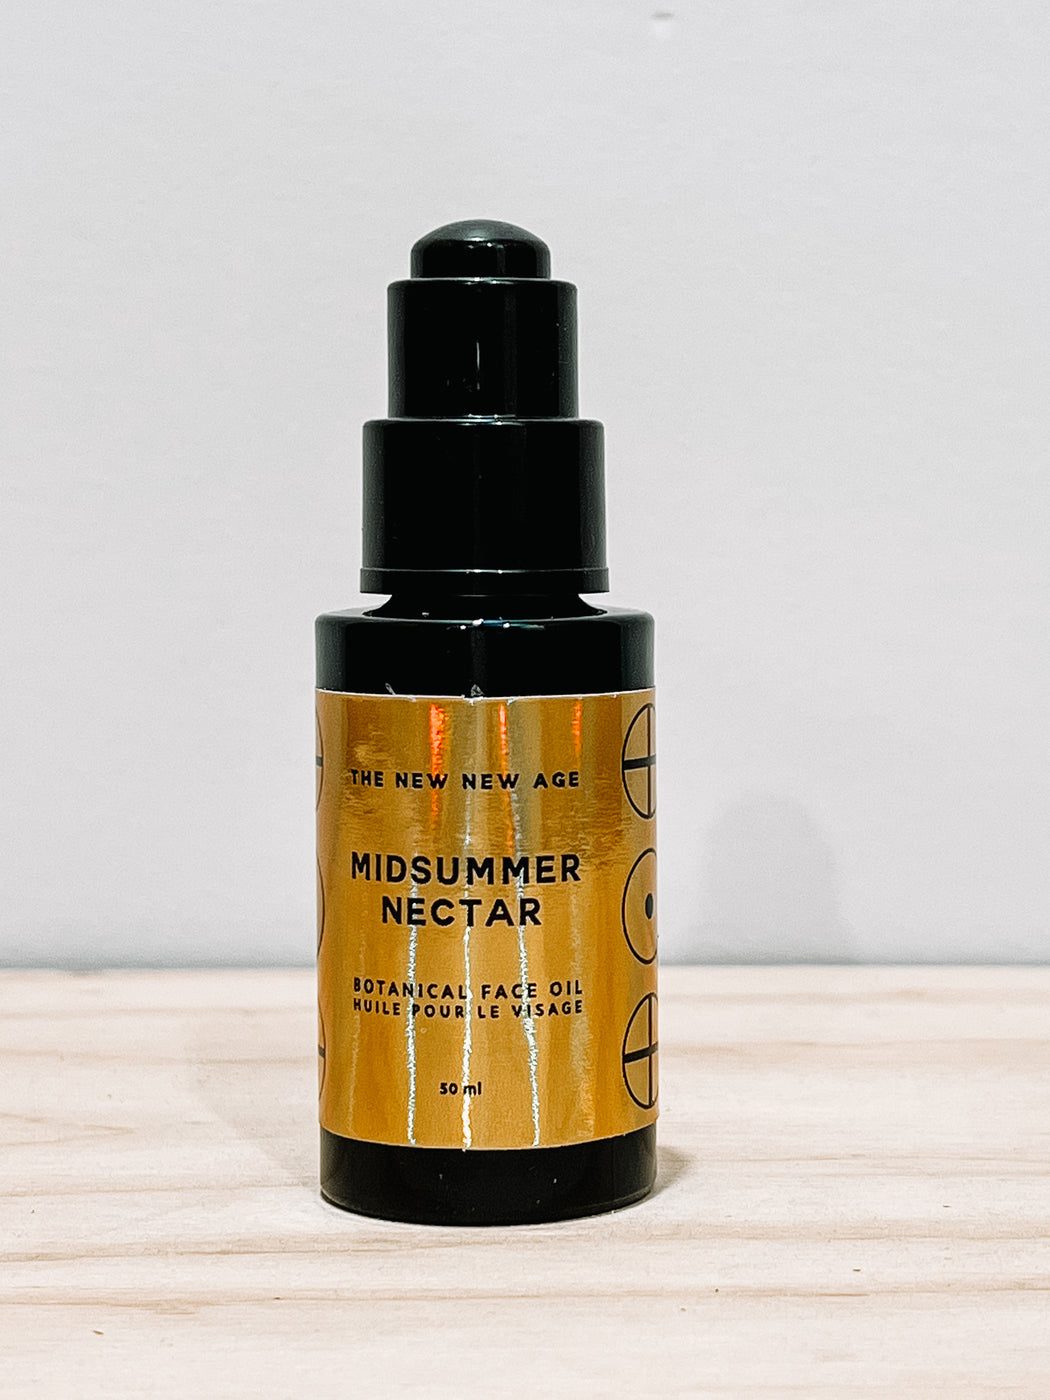 The New New Age- Midsummer Nectar Botanical Face Oil